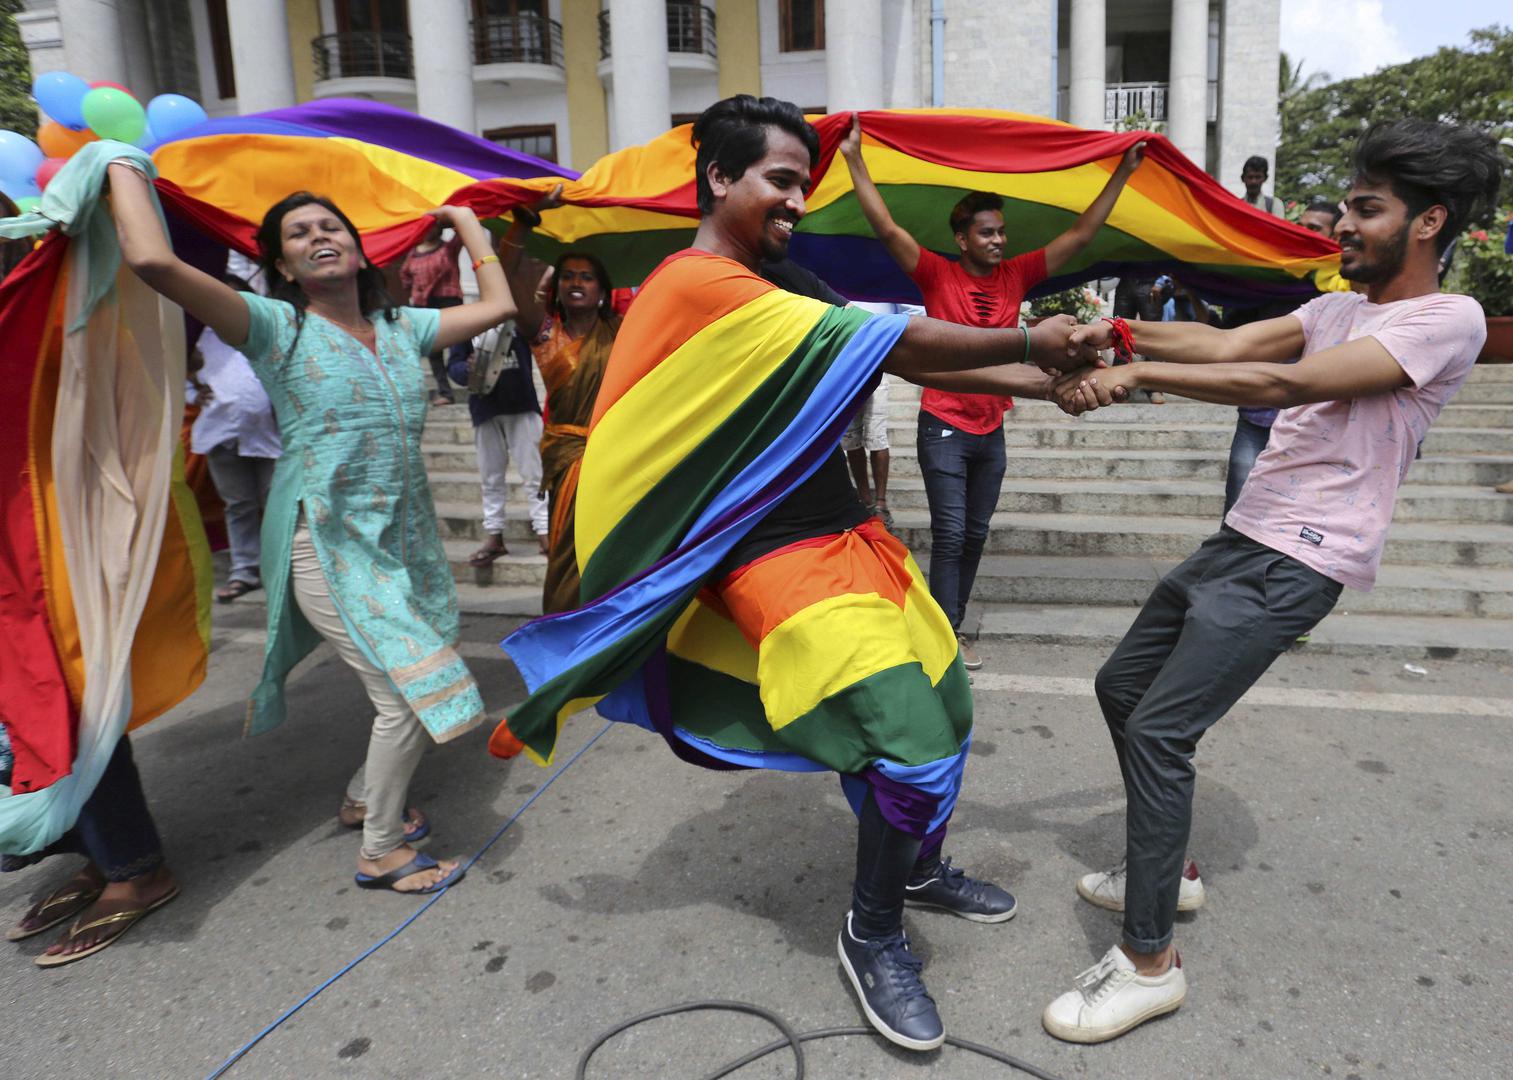 People celebrate the Indian Supreme Court decision to strike down a colonial-era law criminalizing same-sex conduct, in Bangalore, India, September 6, 2018.